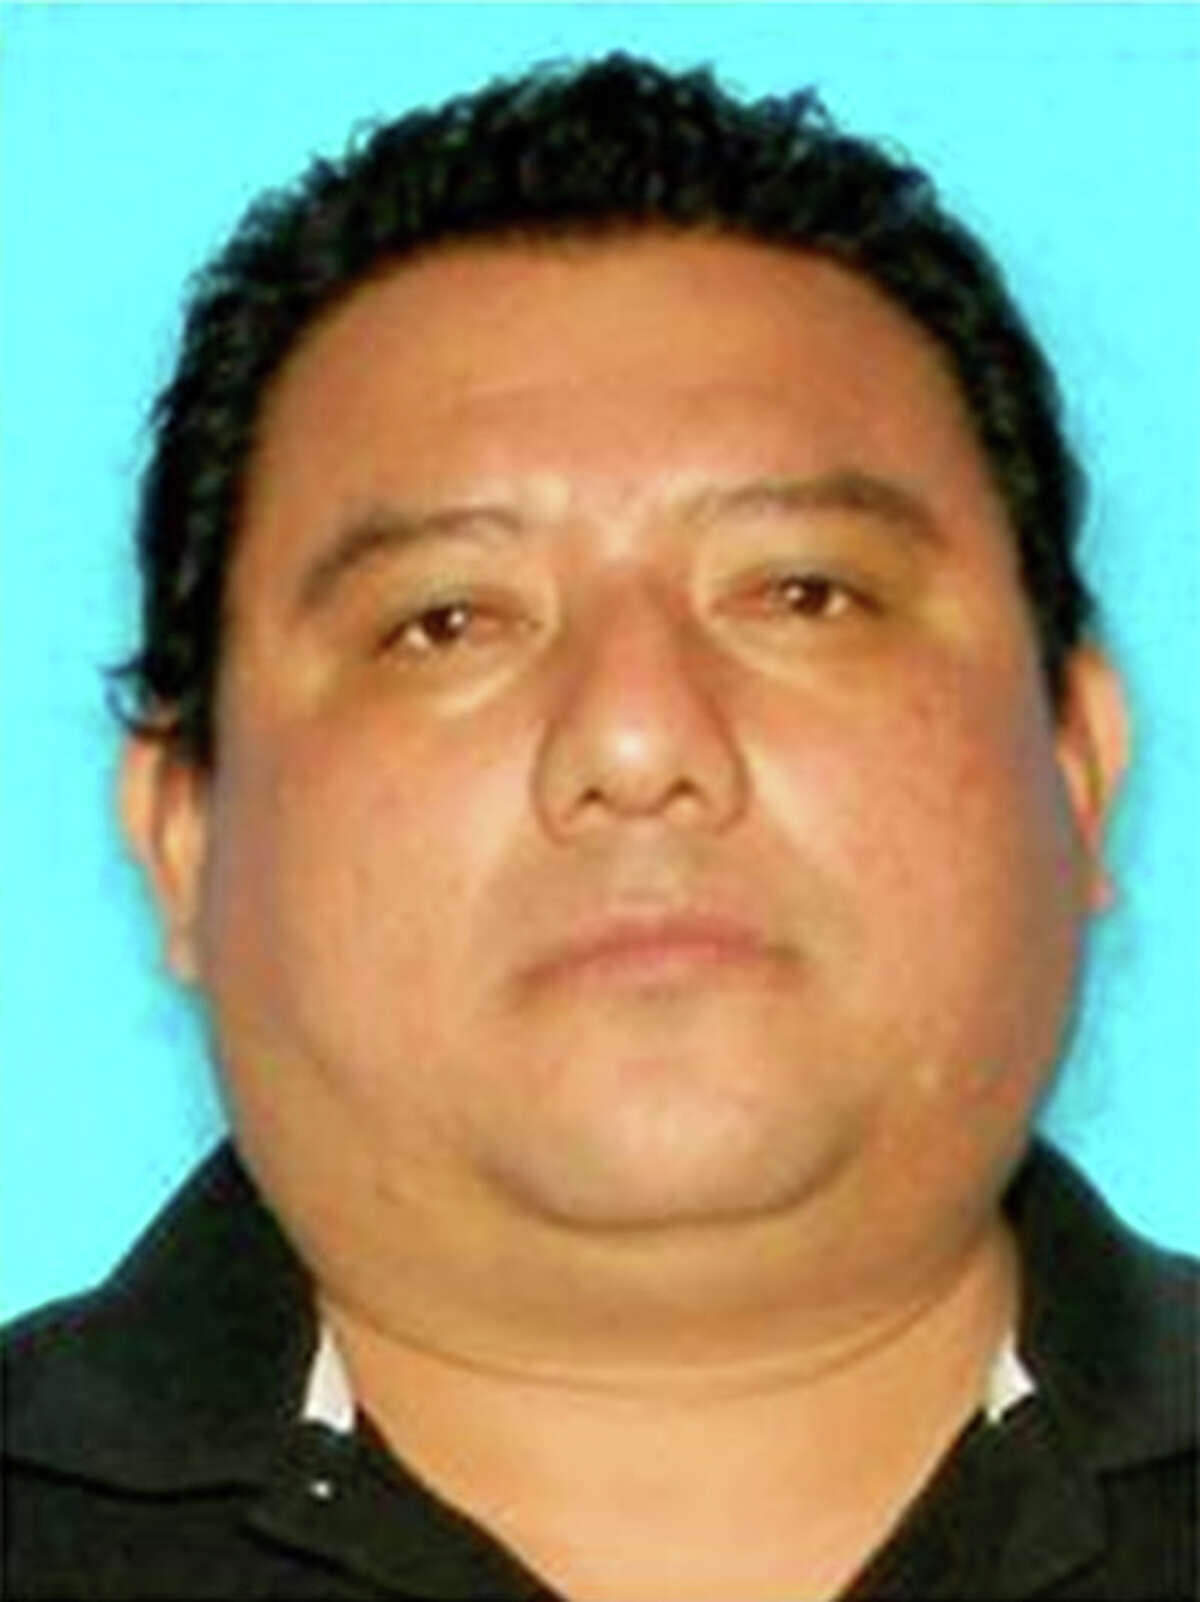 Police on Friday issued an arrest warrant in connection to Wednesday's fatal hit-and-run of Larkspur Elementary fourth-grader Tatyana Babineaux. But the suspect, Isidro Espinosa-Solis, 39, has not yet been apprehended for the charge: failure to stop and render aid — serious bodily injury.